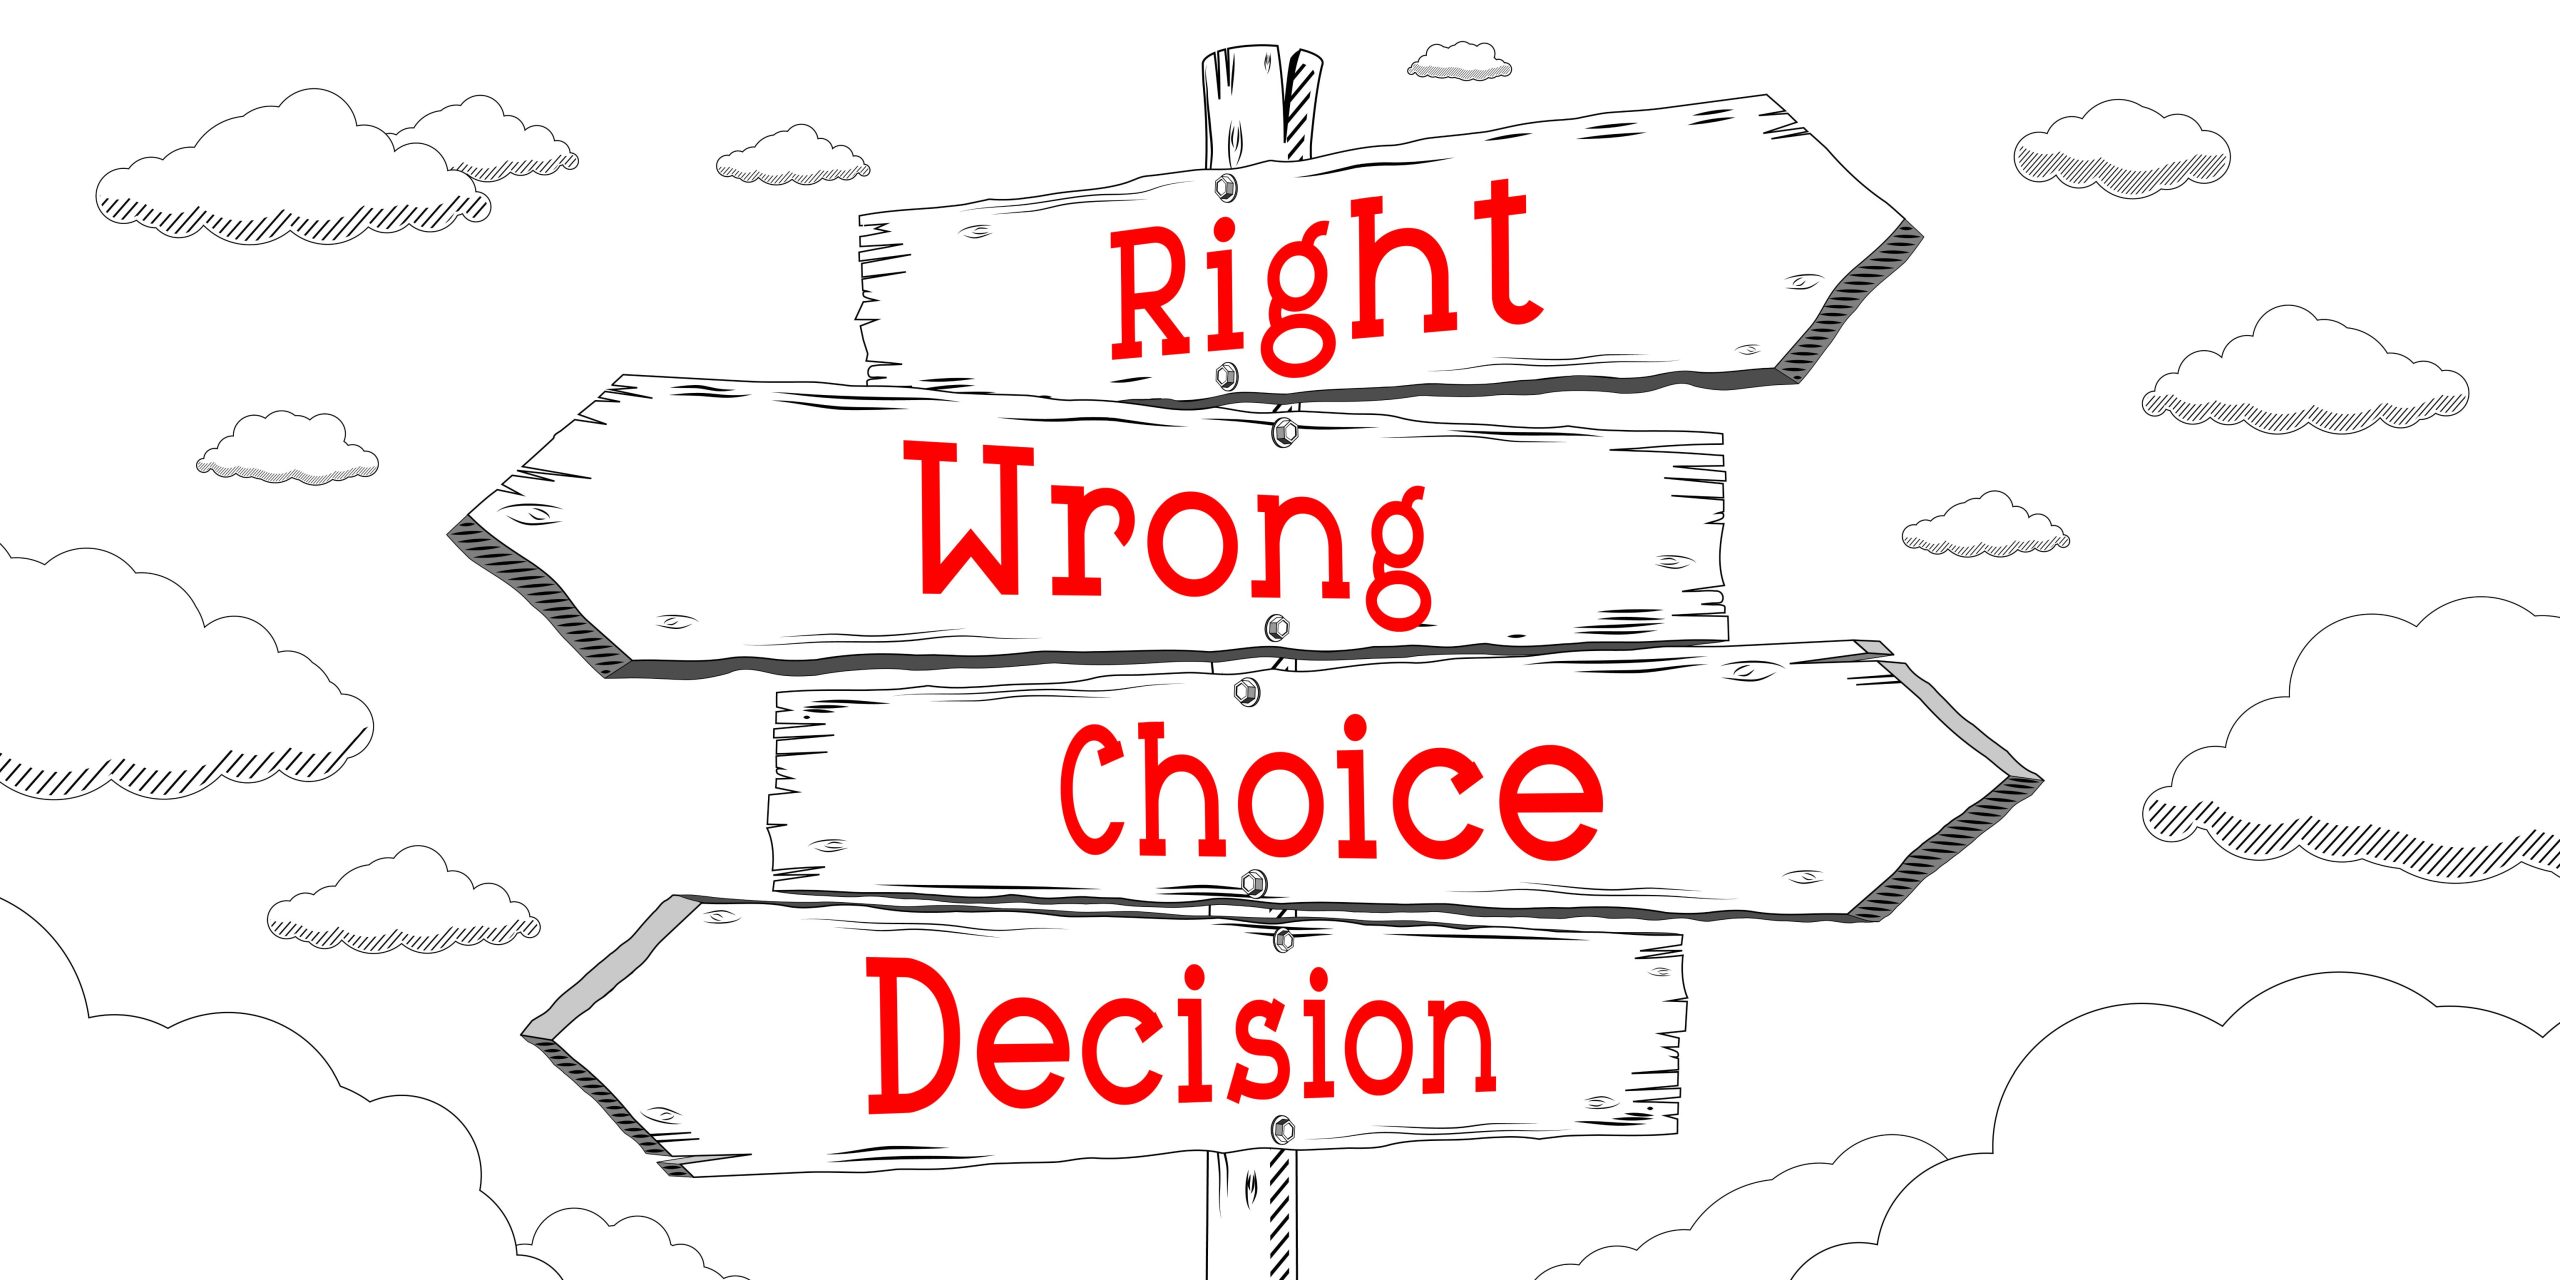 right-wrong-choice-decision-outline-signpost-with-four-arrows-2-1-scaled.jpg